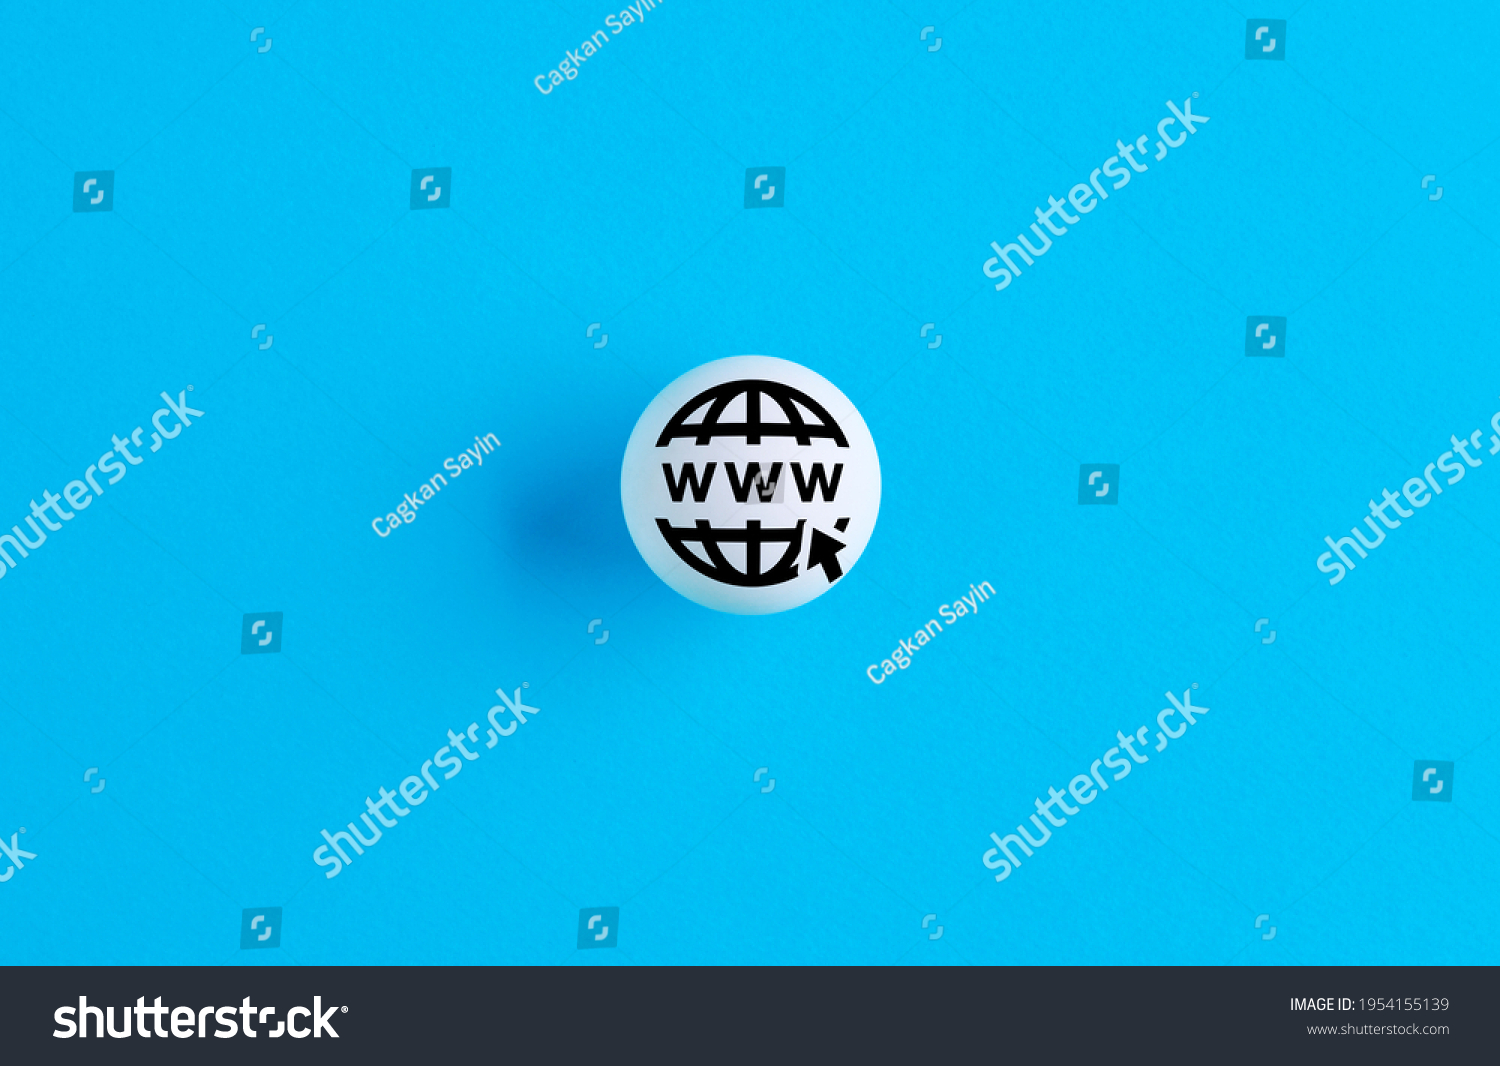 World wide web www symbol on a ball button on blue background. Internet technology concept. #1954155139